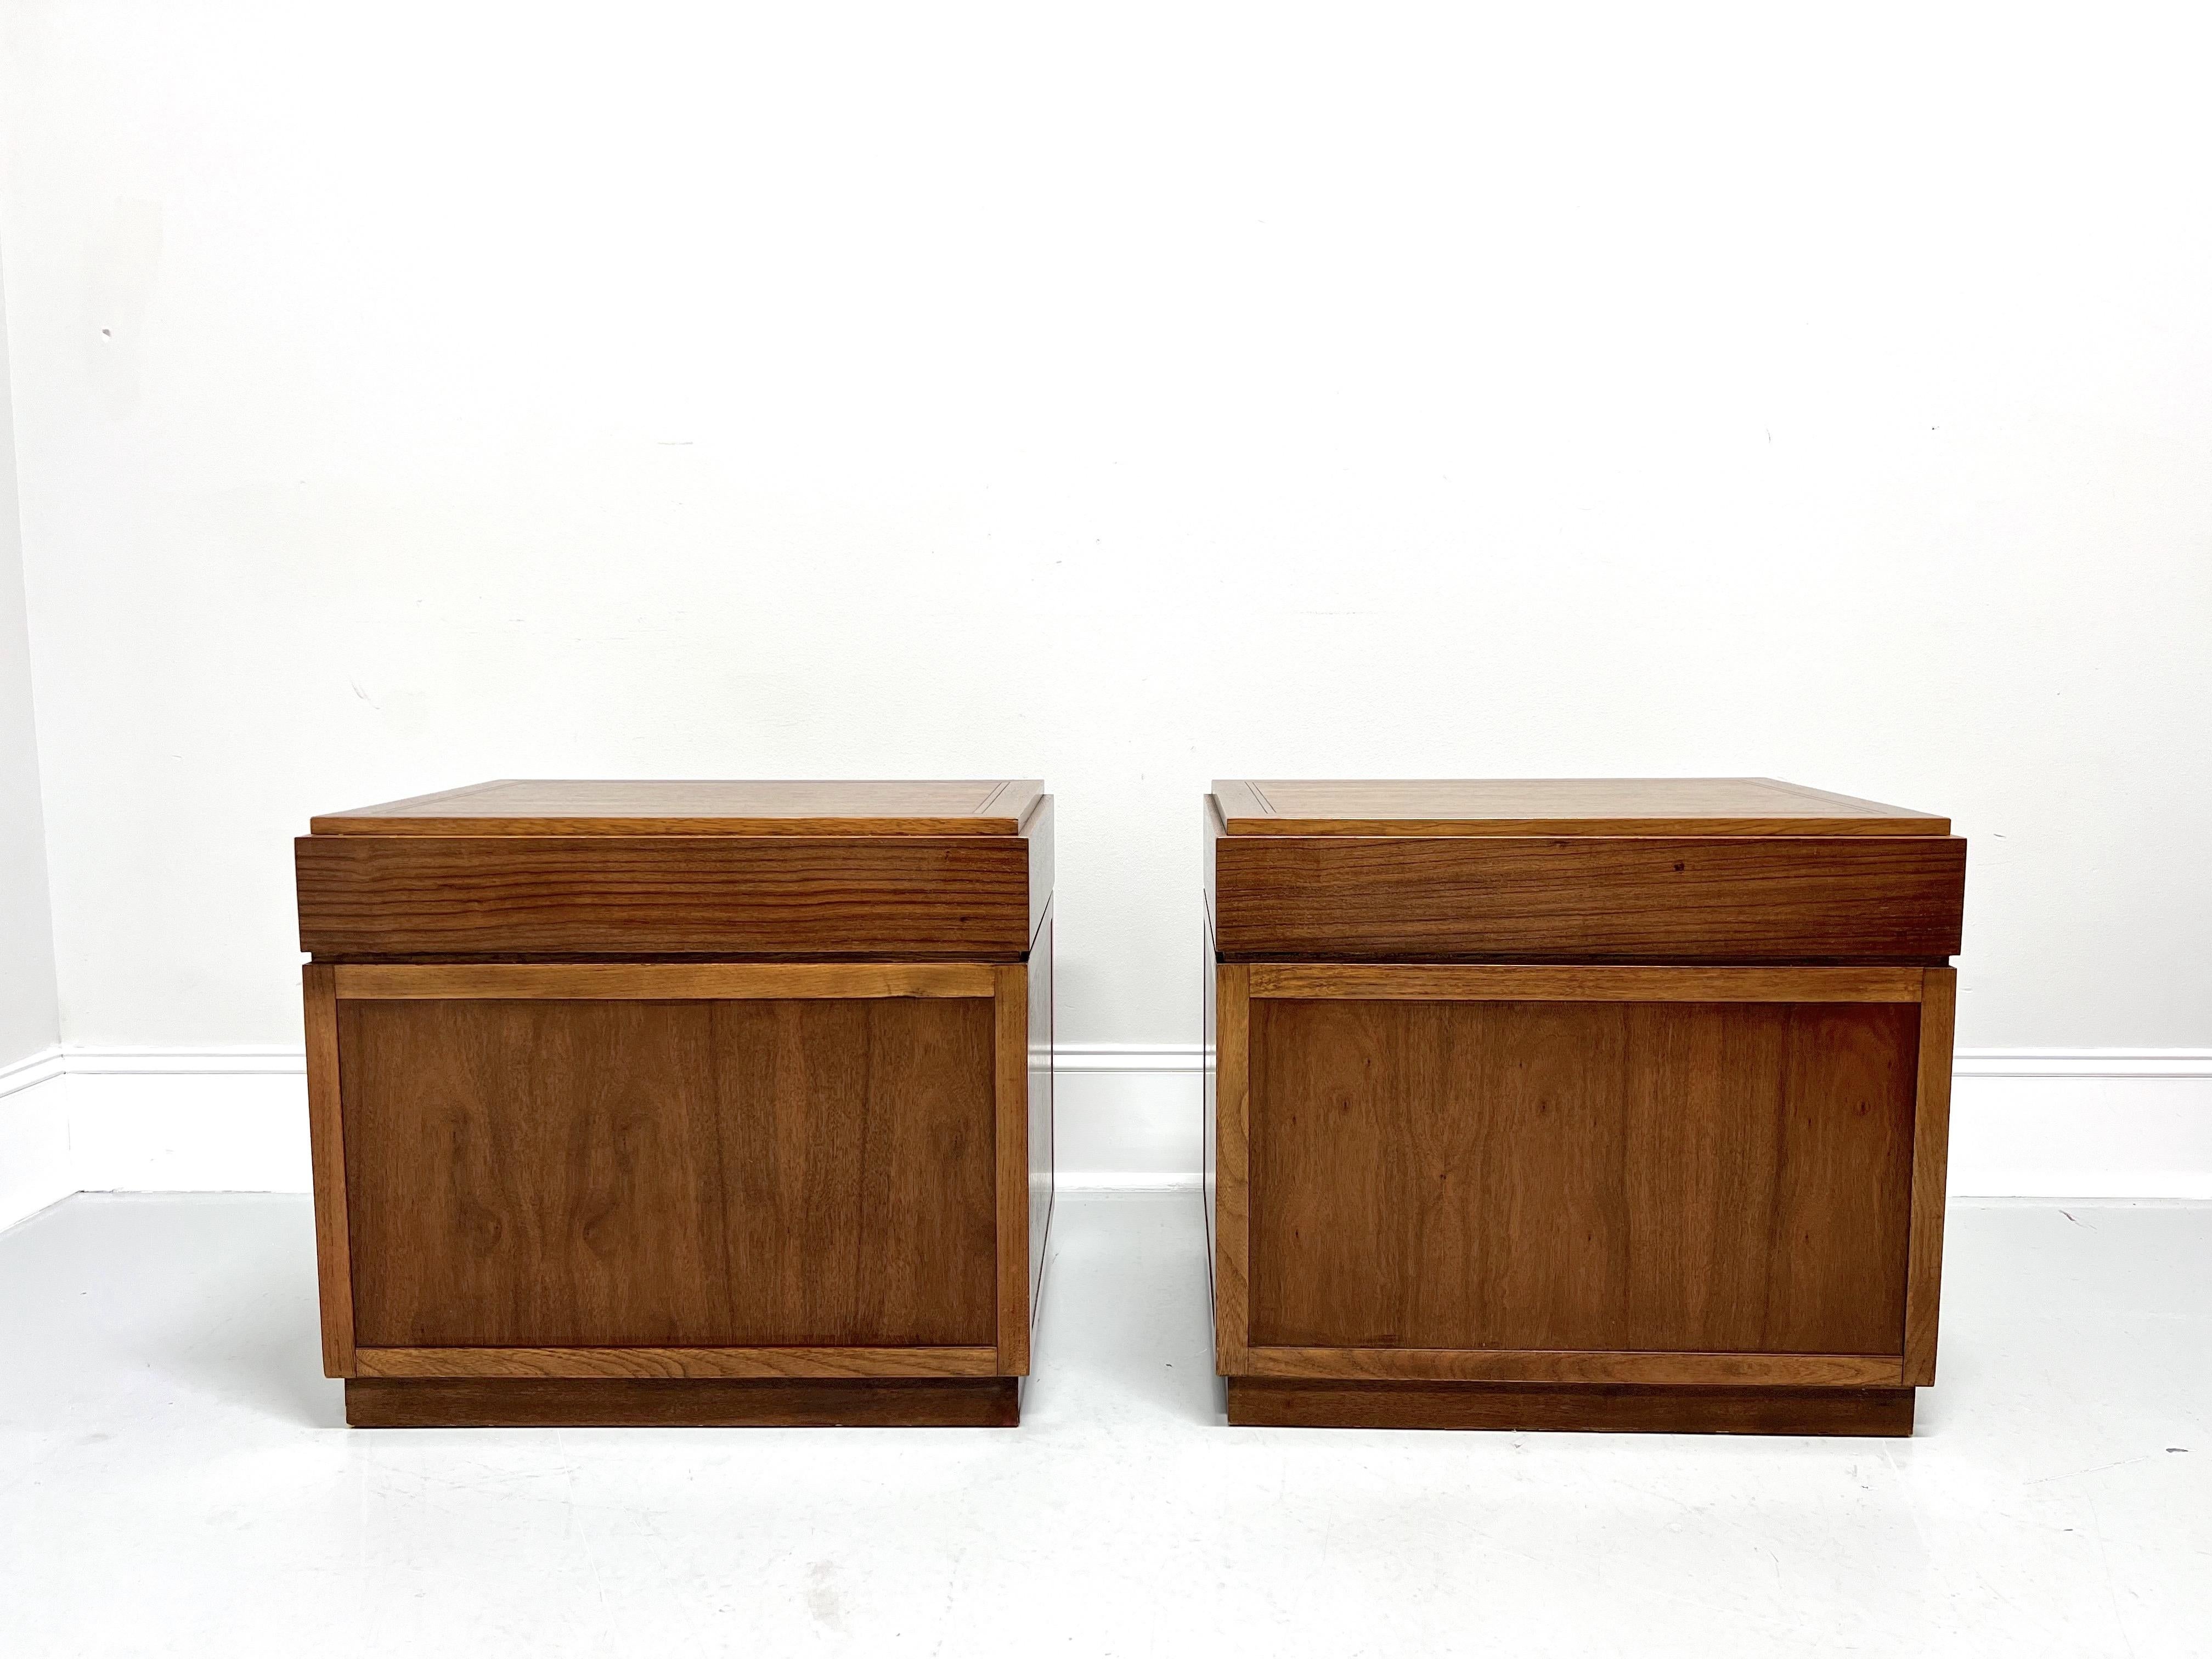 BAKER Mid 20th Century Rosewood & Walnut Asian Inspired Nightstands - Pair In Good Condition For Sale In Charlotte, NC